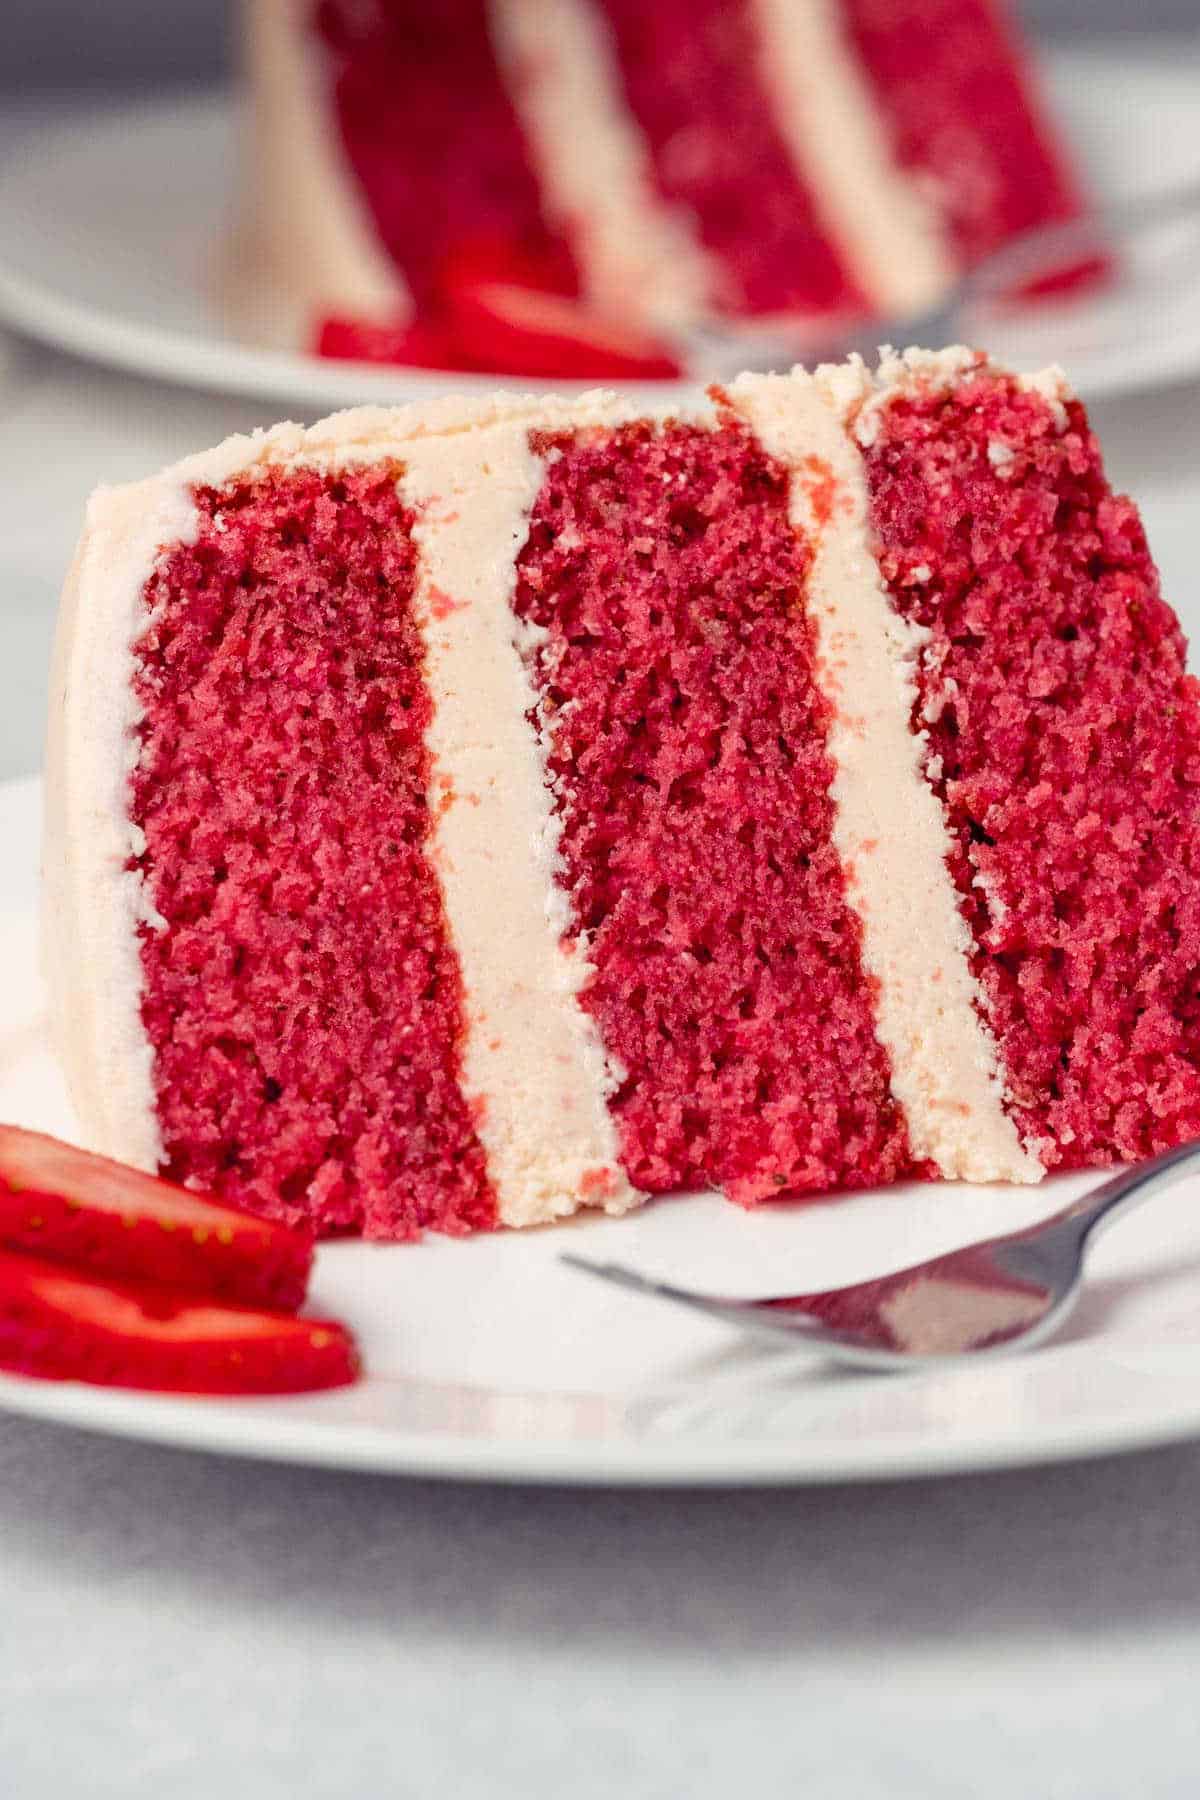 Slice of strawberry cake on a white plate with a cake fork.